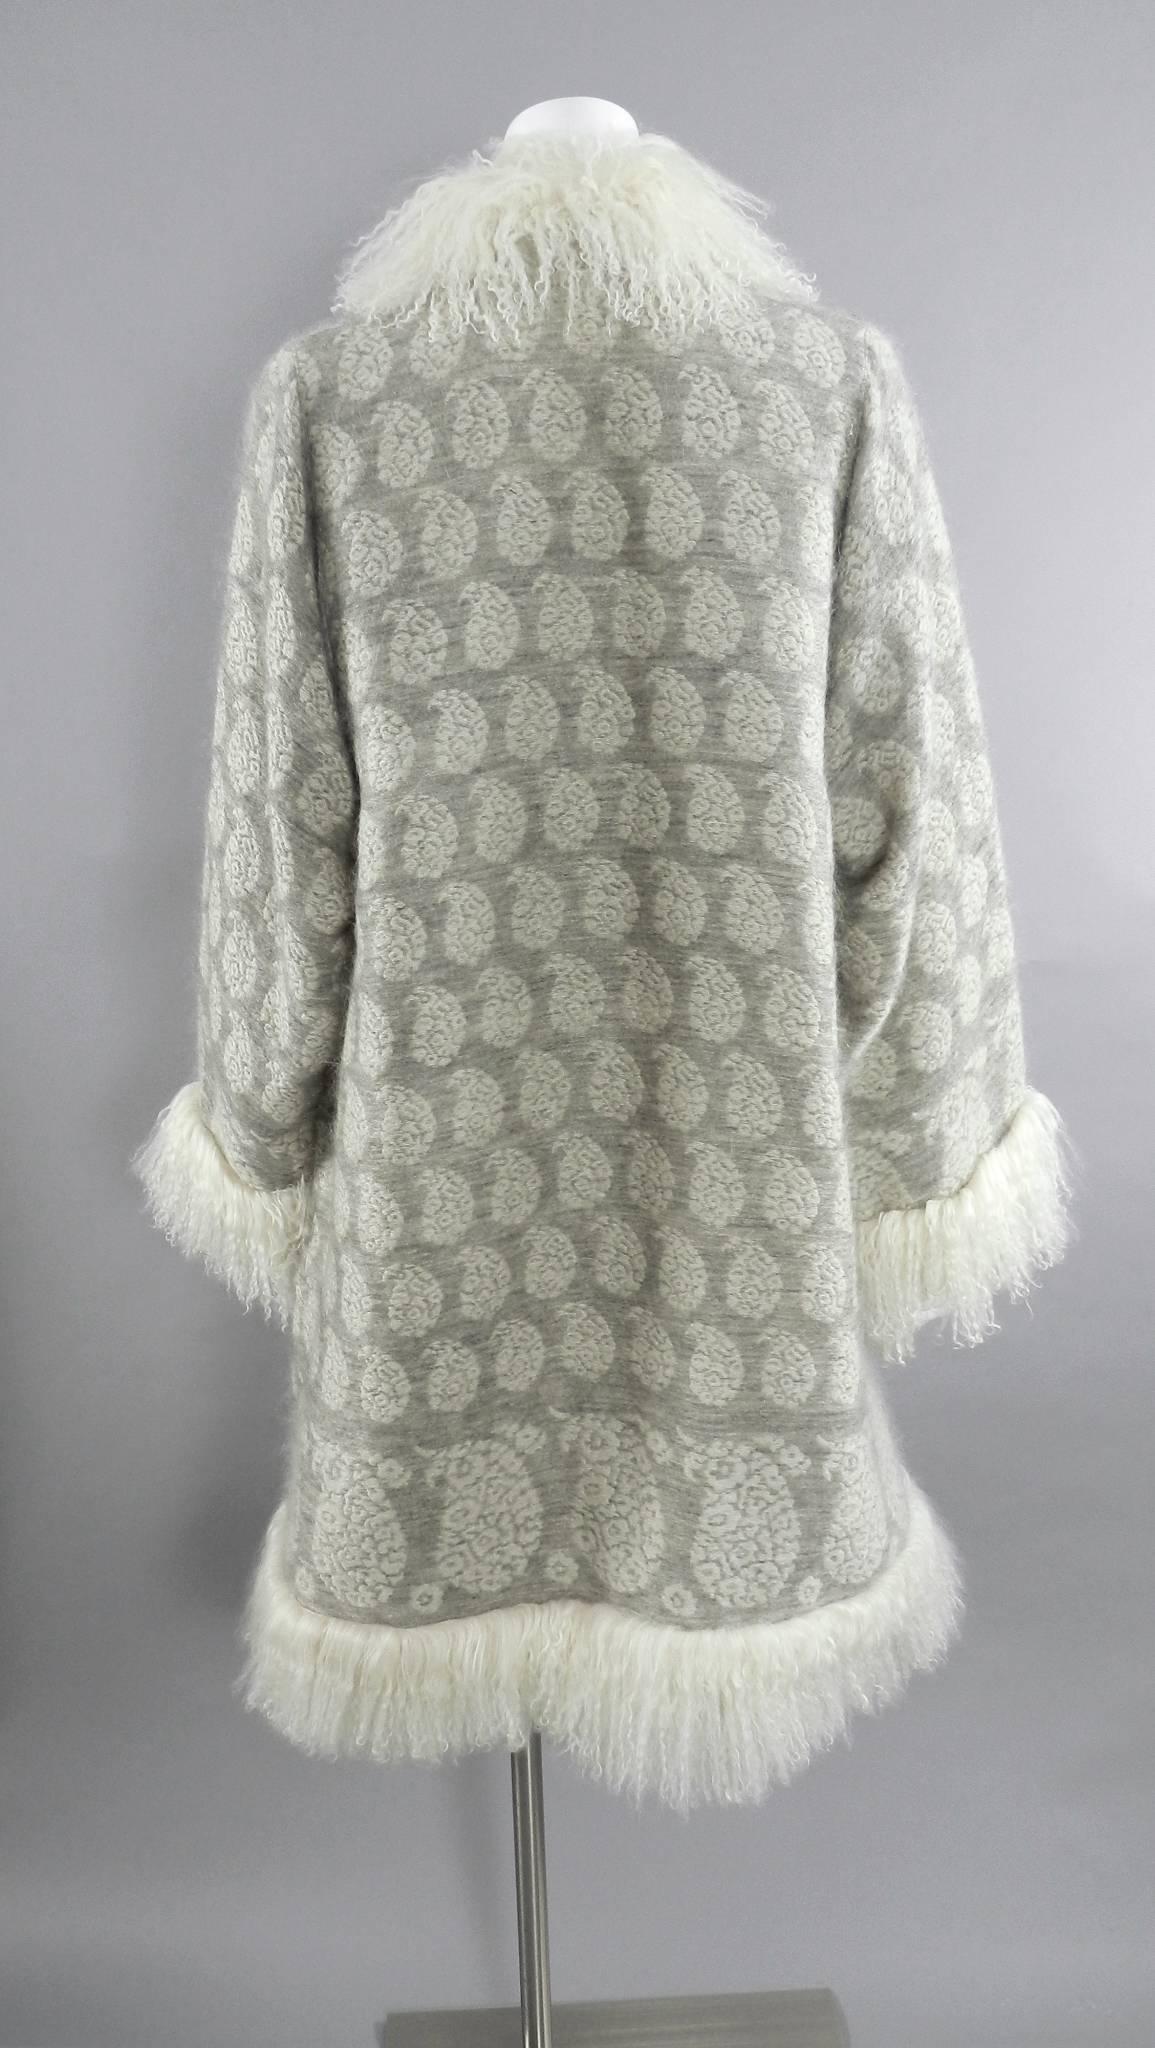 Pierre Balmain haute couture by Oscar de la renta light grey and ivory sweater coat. Numbered haute couture piece from the winter 2000 collection. Mohair blend grey and ivory paisley pattern, curly mongolian lamb fur trim, fastens with hook and eye